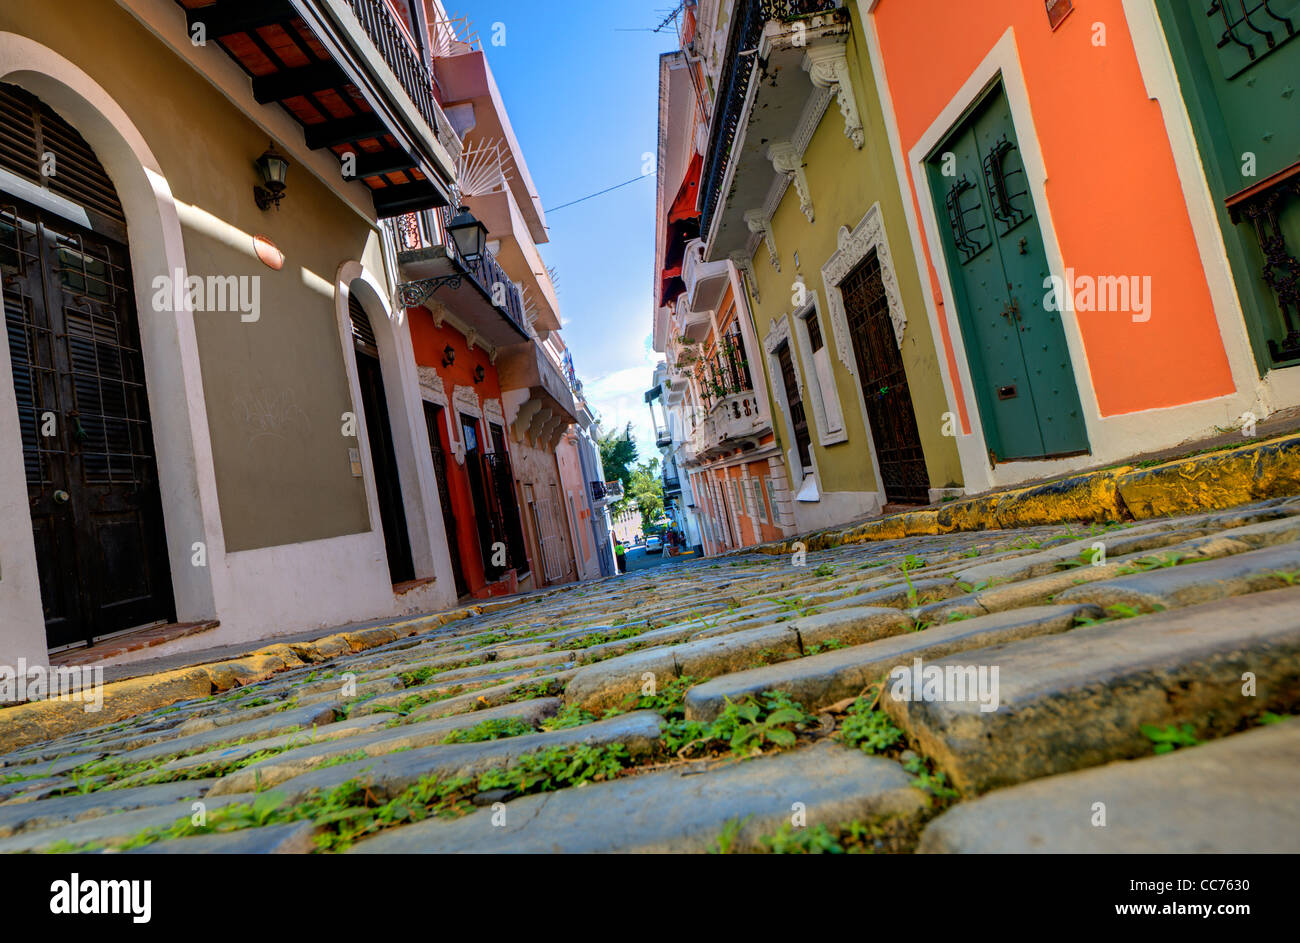 Back alley in the old historic city of San Juan, Puerto Rico. Stock Photo